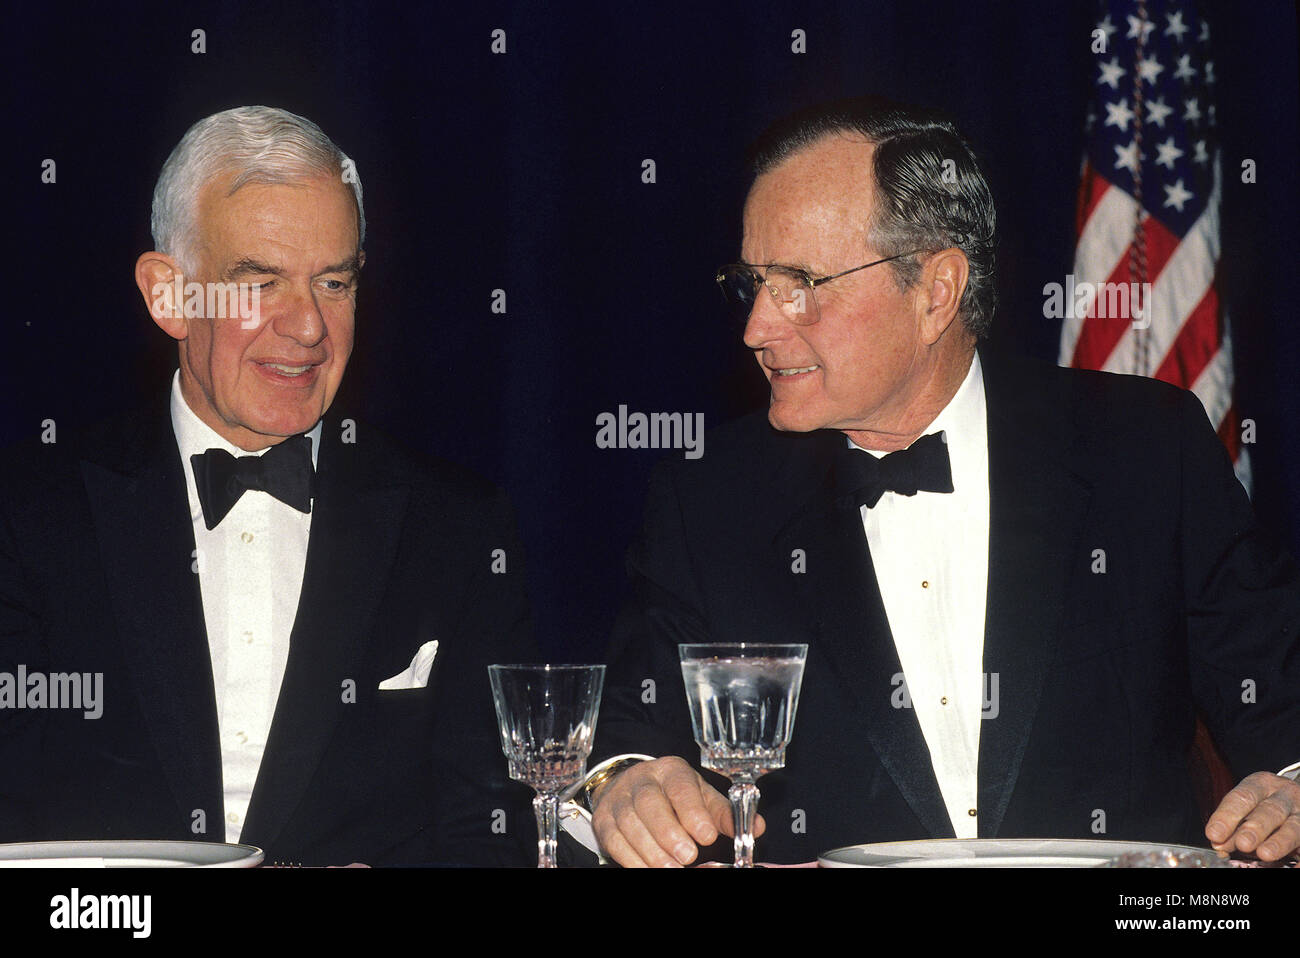 Washington DC, USA,  May 1992 President George H.W. Bush. in Black tie at the White House Correspondents dinner. Seated next to him is Speaker of the House Thomas Foley. Credit: Mark Reinstein/MediaPunch Stock Photo